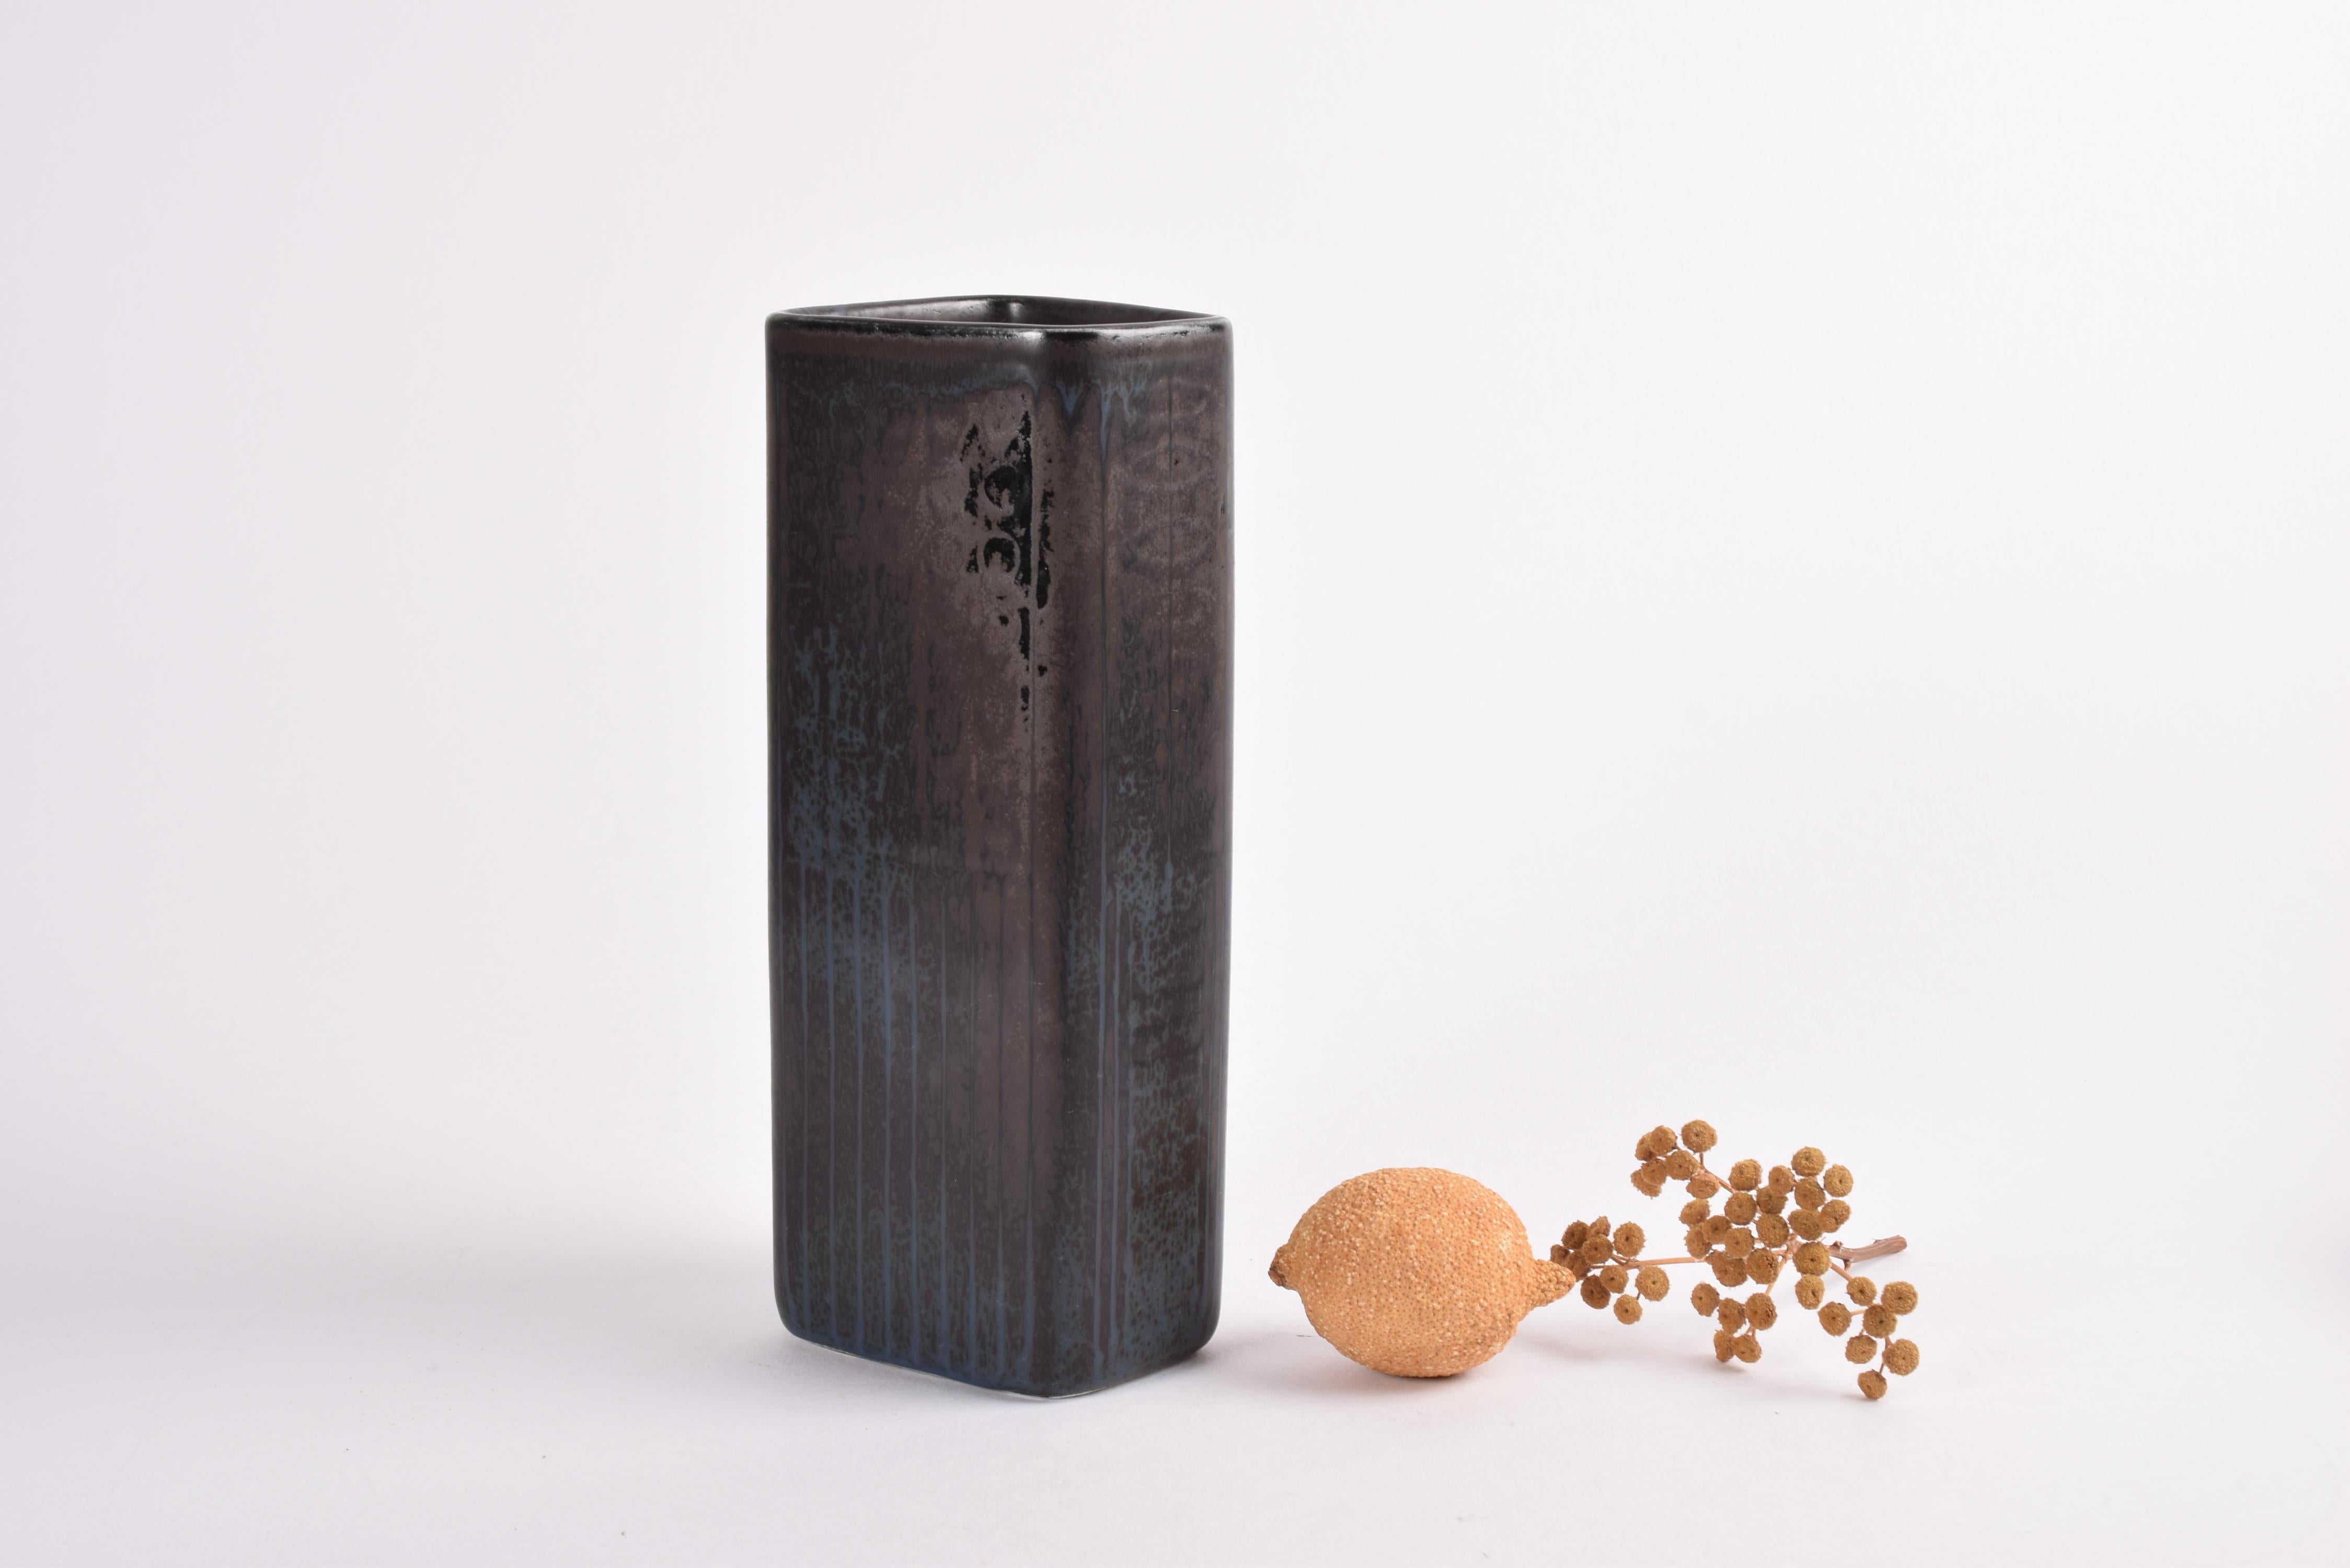 Midcentury ceramic vase by Gunnar Nylund for Rörstrand Sweden.
Made circa 1950s to 1960s.

The vase features an interesting glaze with a semi matte black, dark brown and blue-gray glaze with a few glossy black elements over incised decor. The